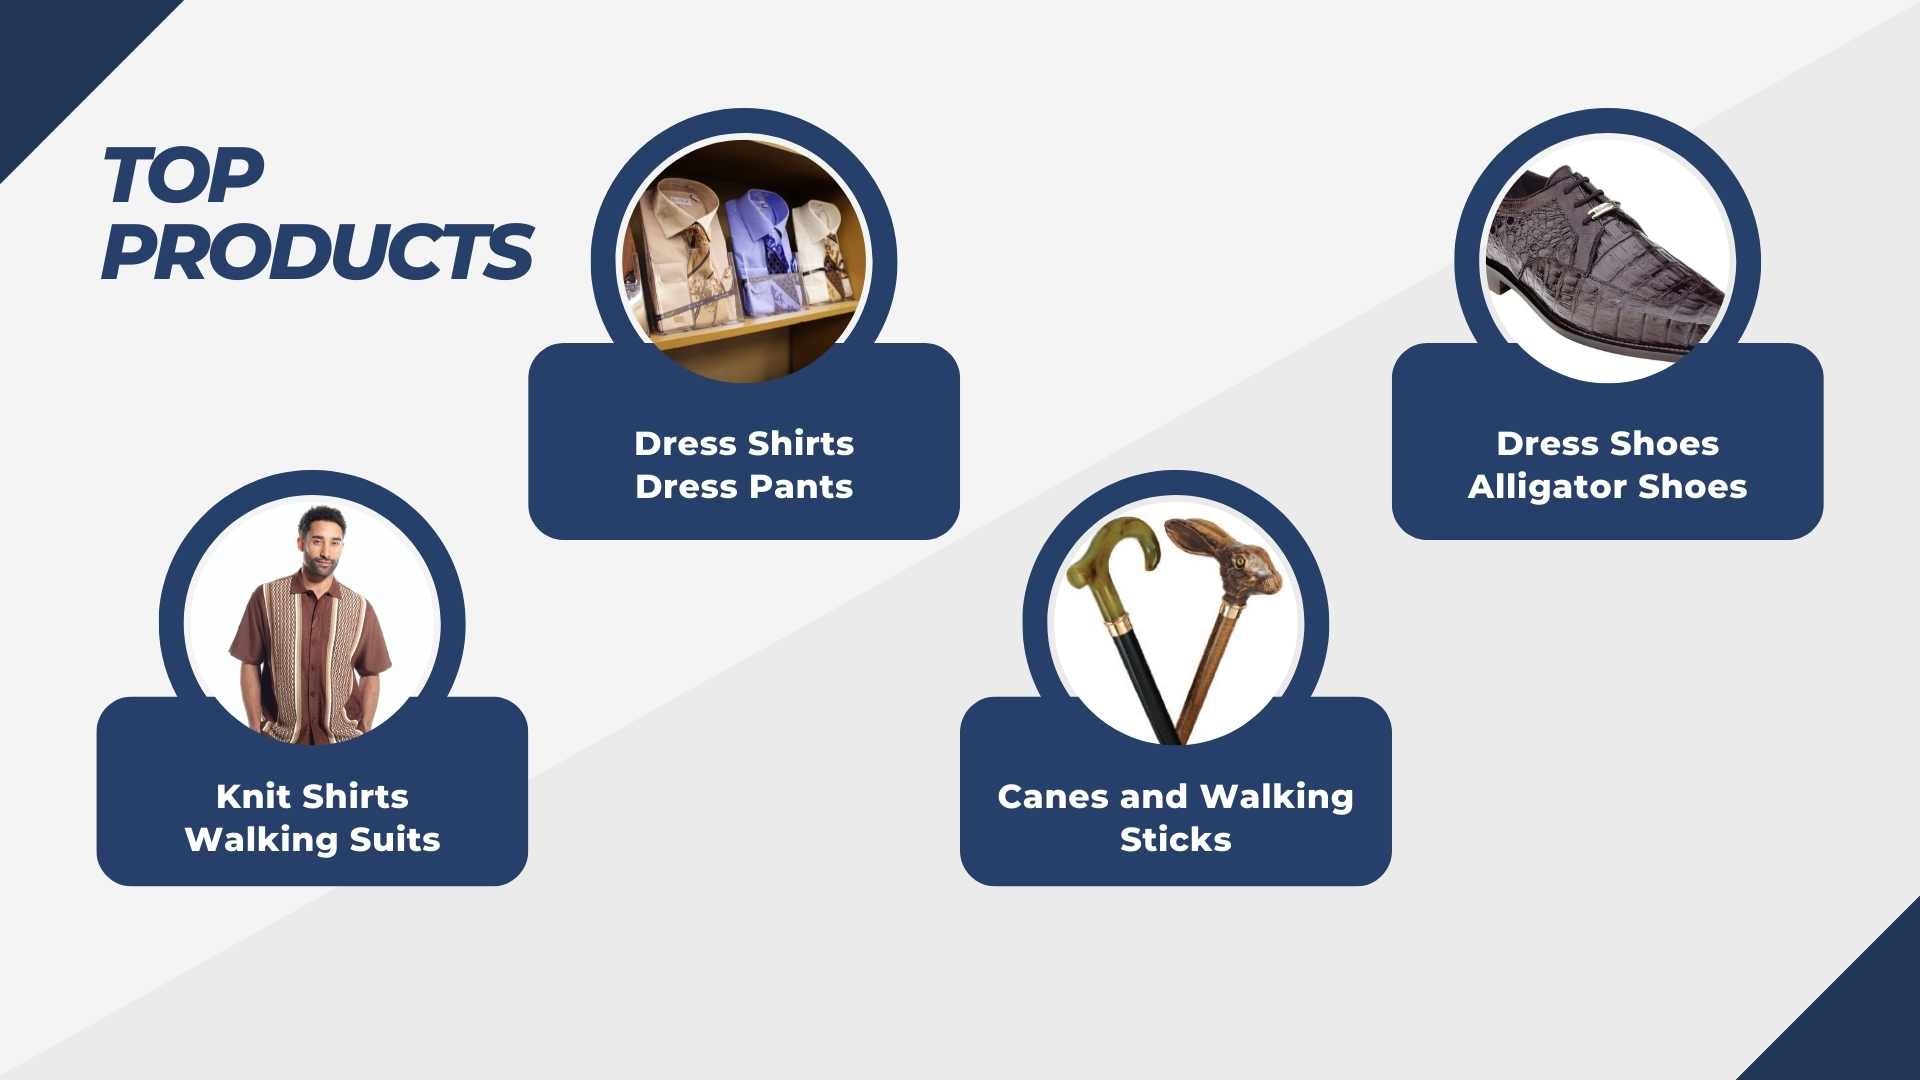 Top Products - Dress Shirts, Dress Pants, Canes Picture and Alligator Shoes Picture Banner